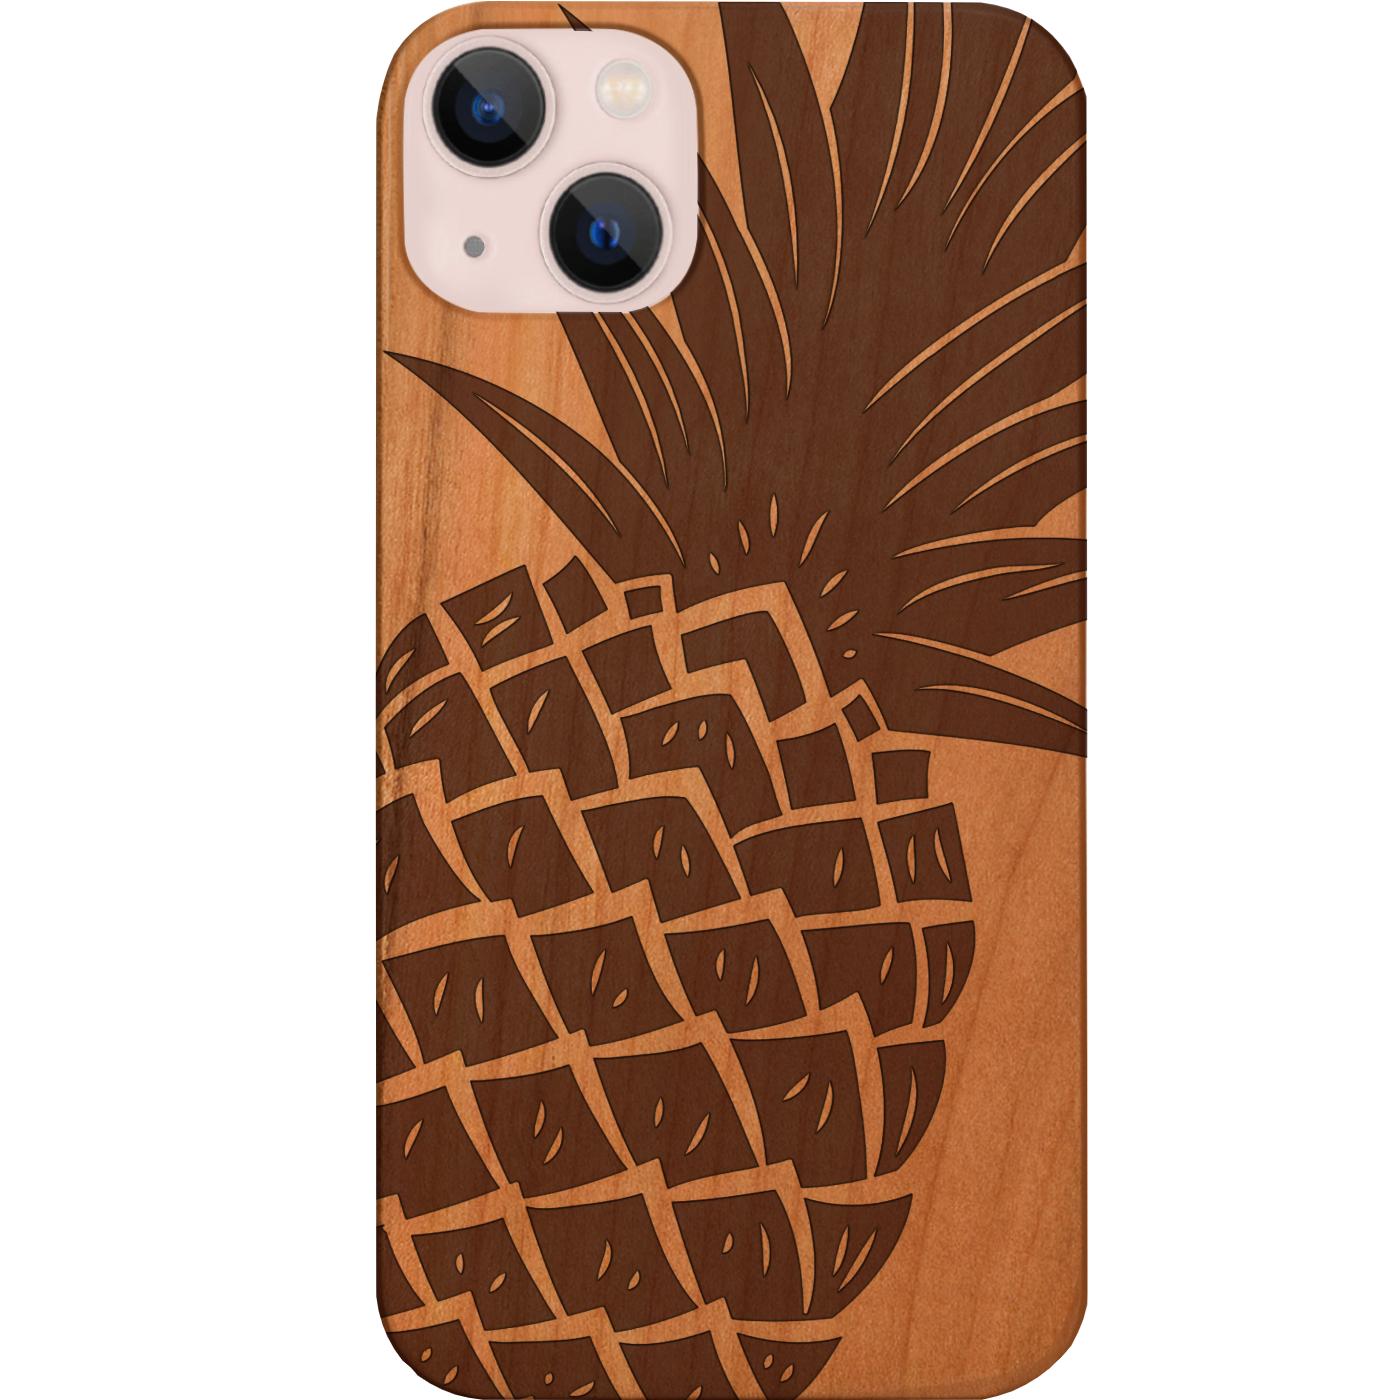 Pineapple - Engraved Phone Case